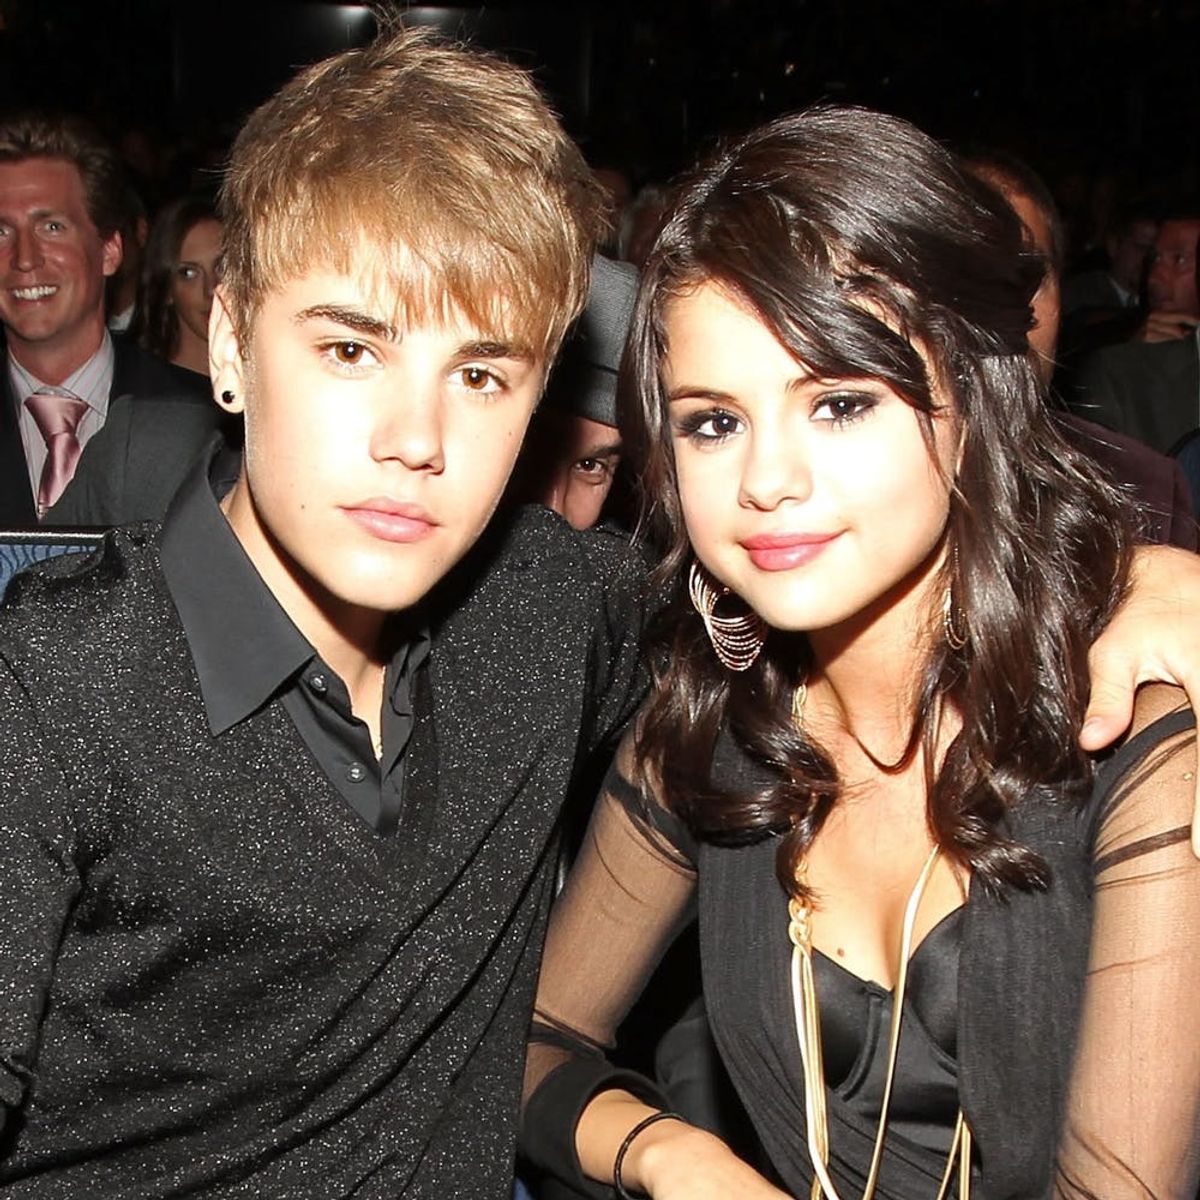 Selena Gomez Reunited With Justin Bieber and the Internet Can’t Handle It